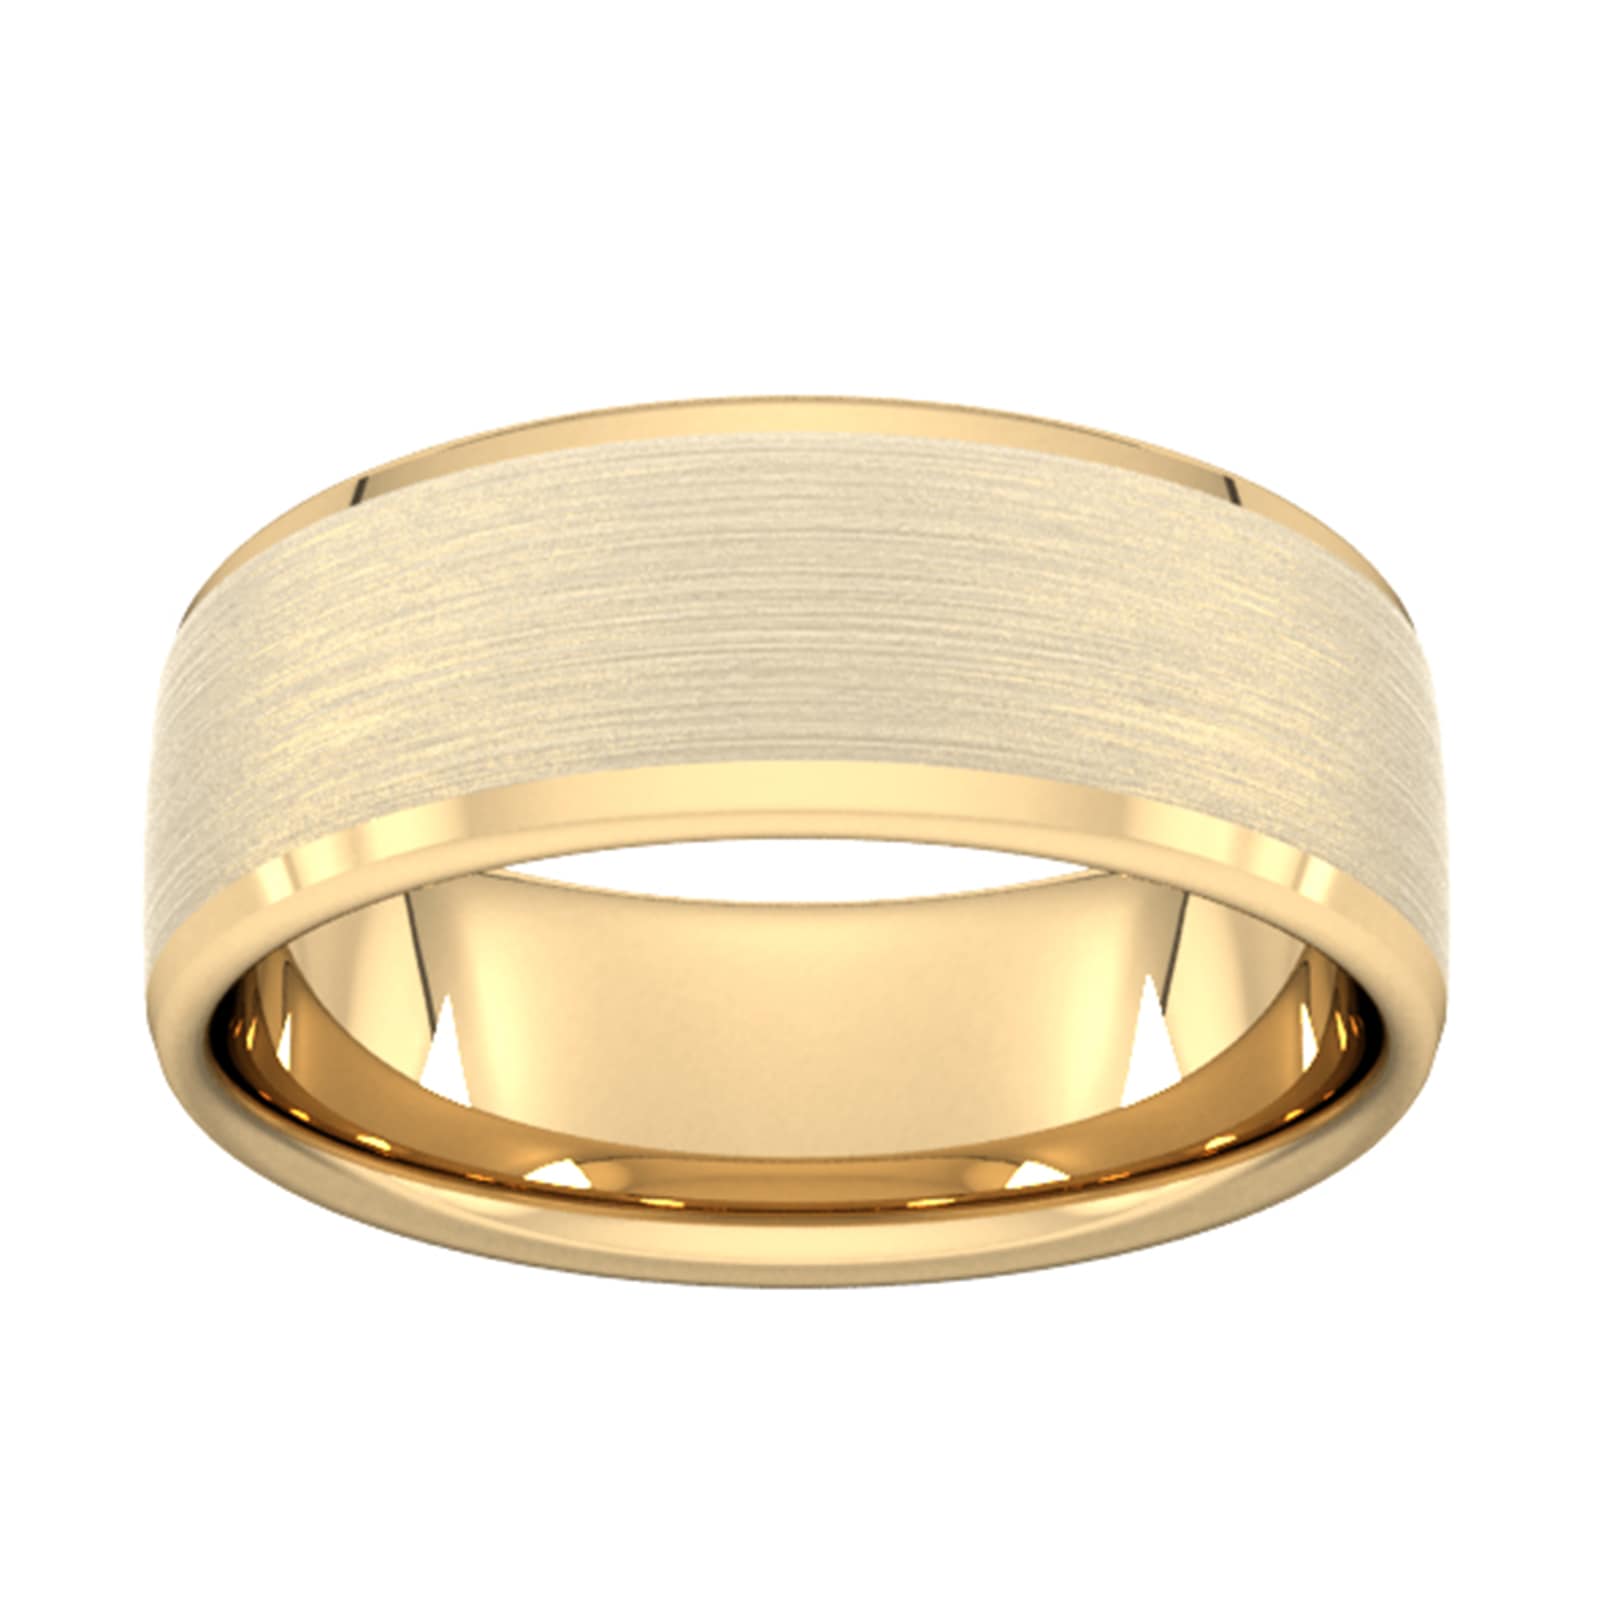 8mm Flat Court Heavy Polished Chamfered Edges With Matt Centre Wedding Ring In 18 Carat Yellow Gold - Ring Size I